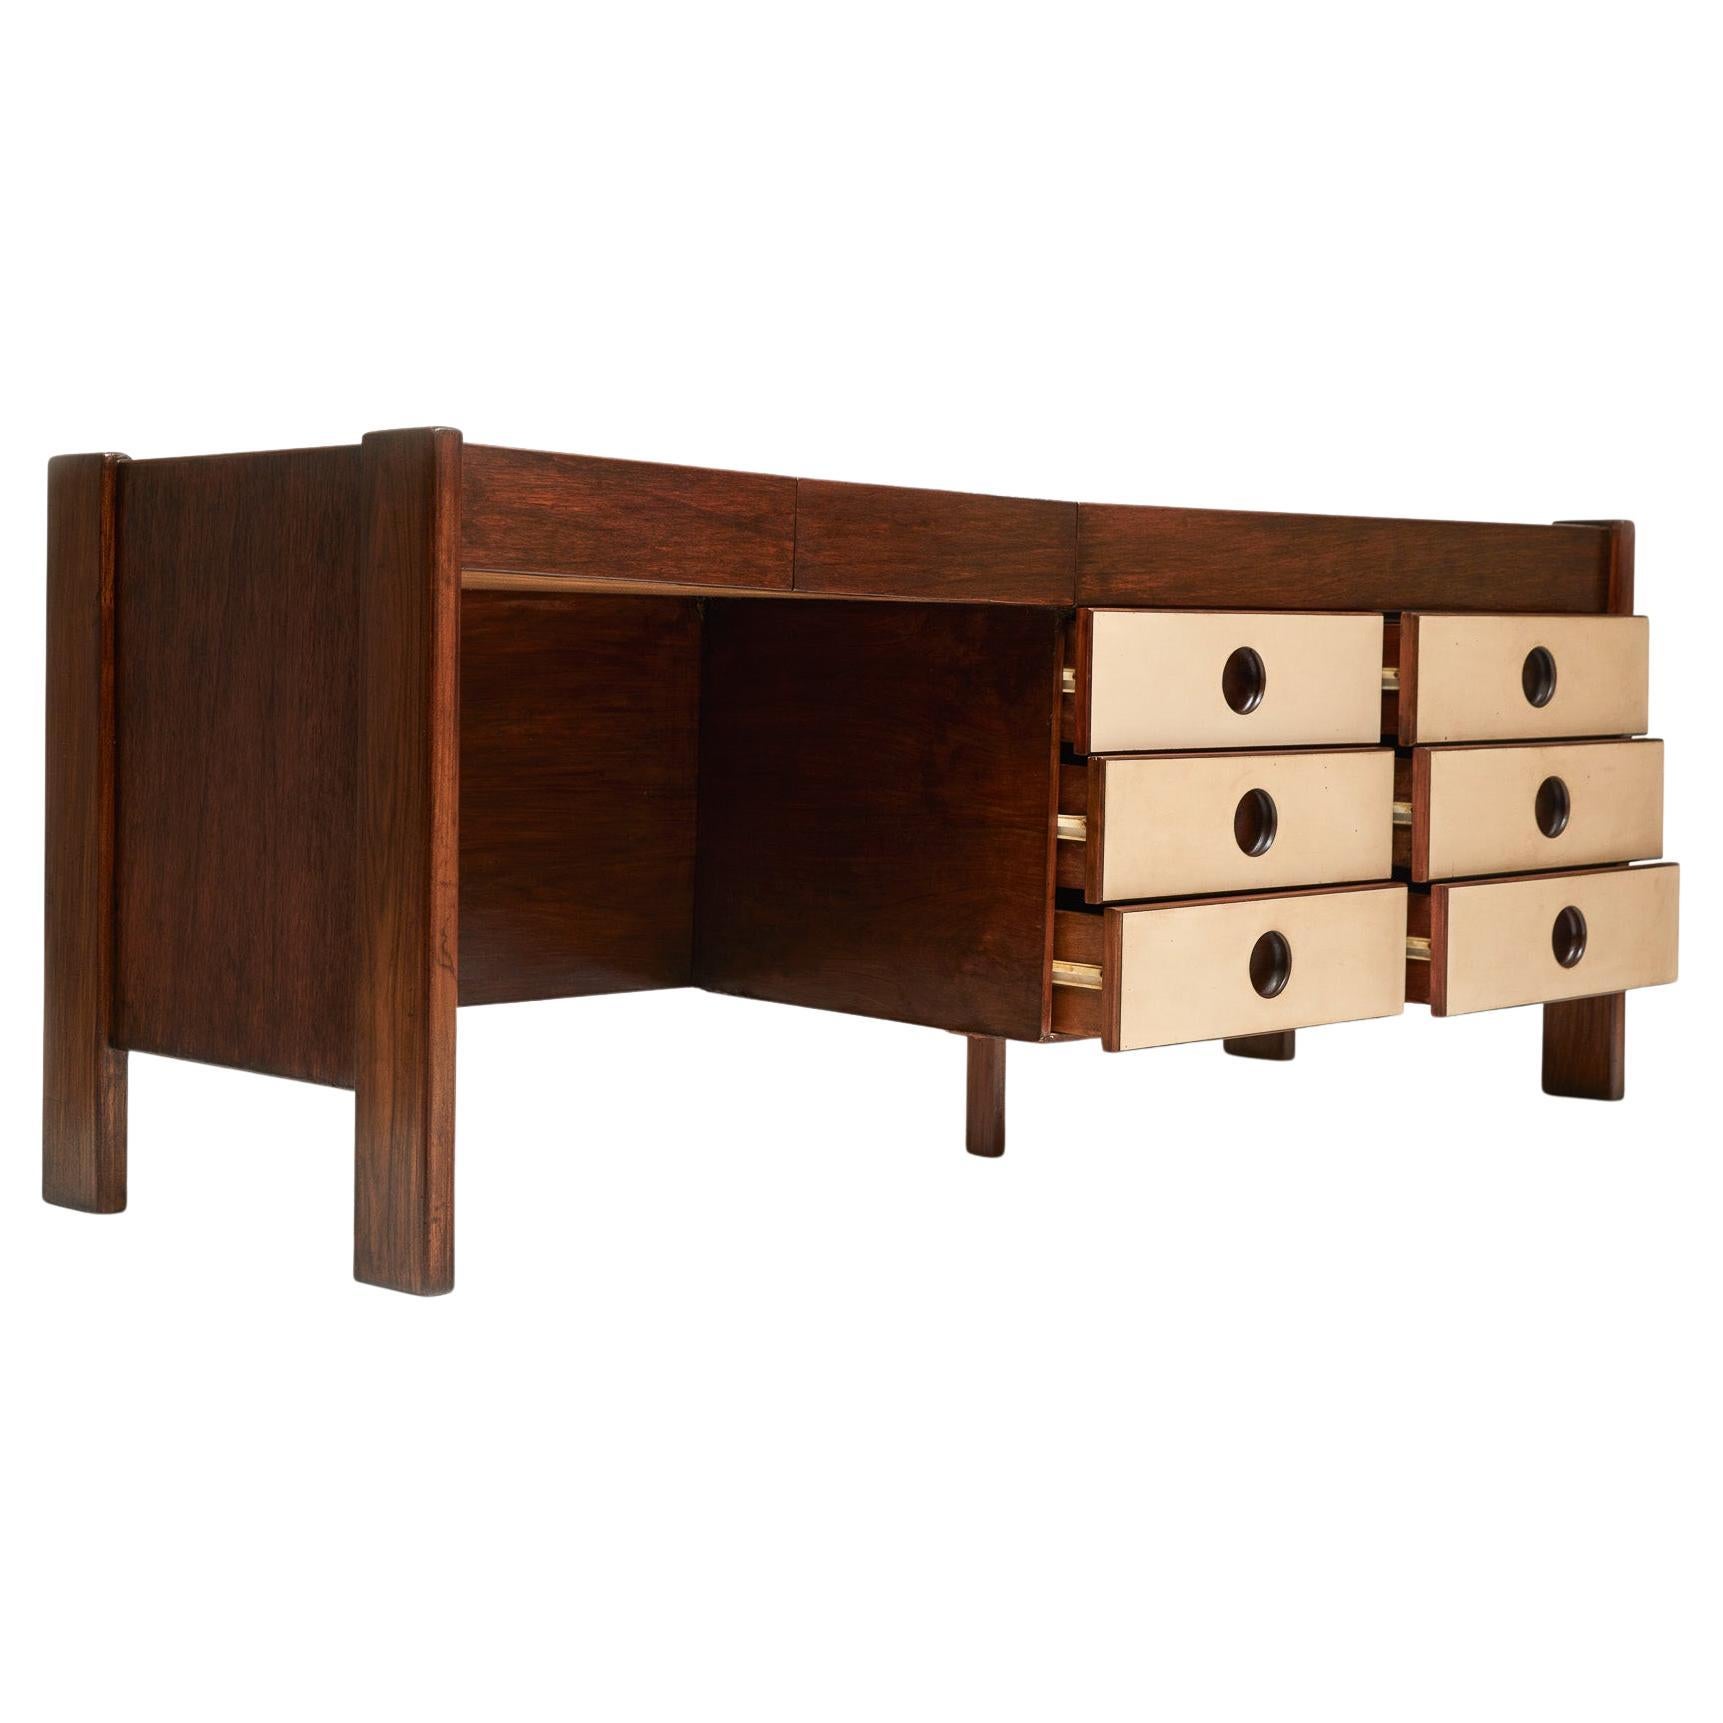 Available today, this Brazilian Modern desk in Light hardwood designed by Jorge Zalszupin for L’Atelier, is gorgeous!

The desk is made of Caviuna hardwood and Formica finishes. It has 6 floating drawers and 2 more in the left side. The top of the